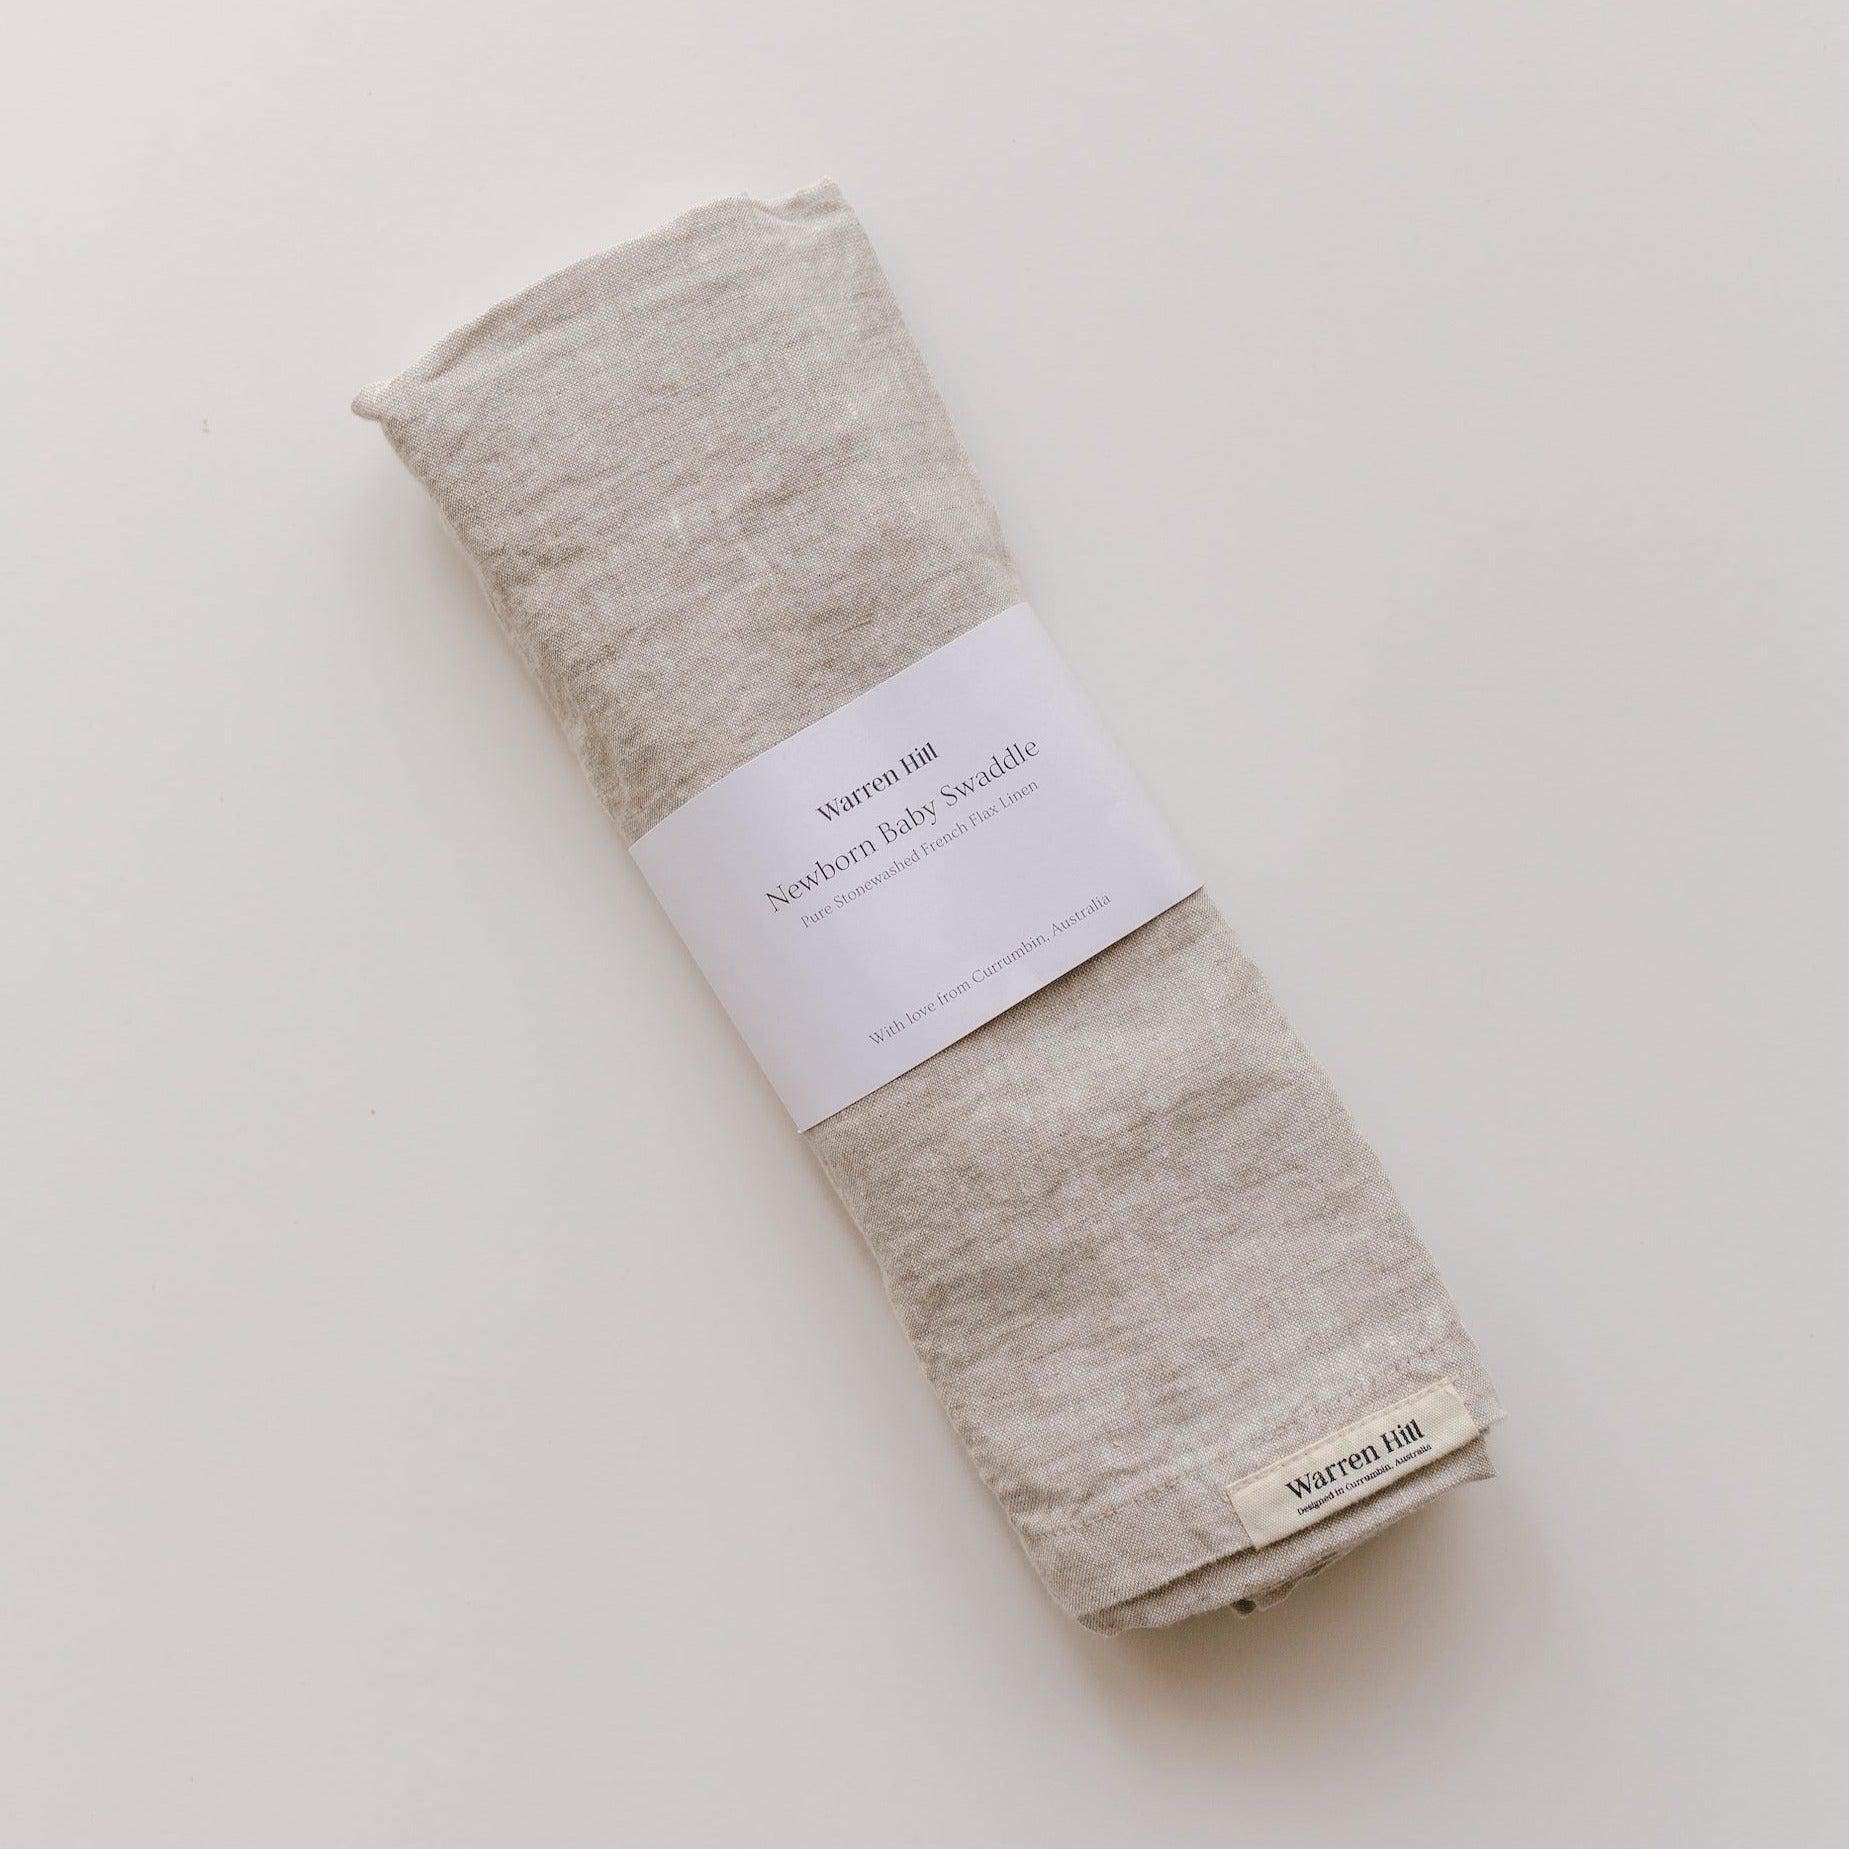 Warren Hill French linen baby swaddle - natural beige.